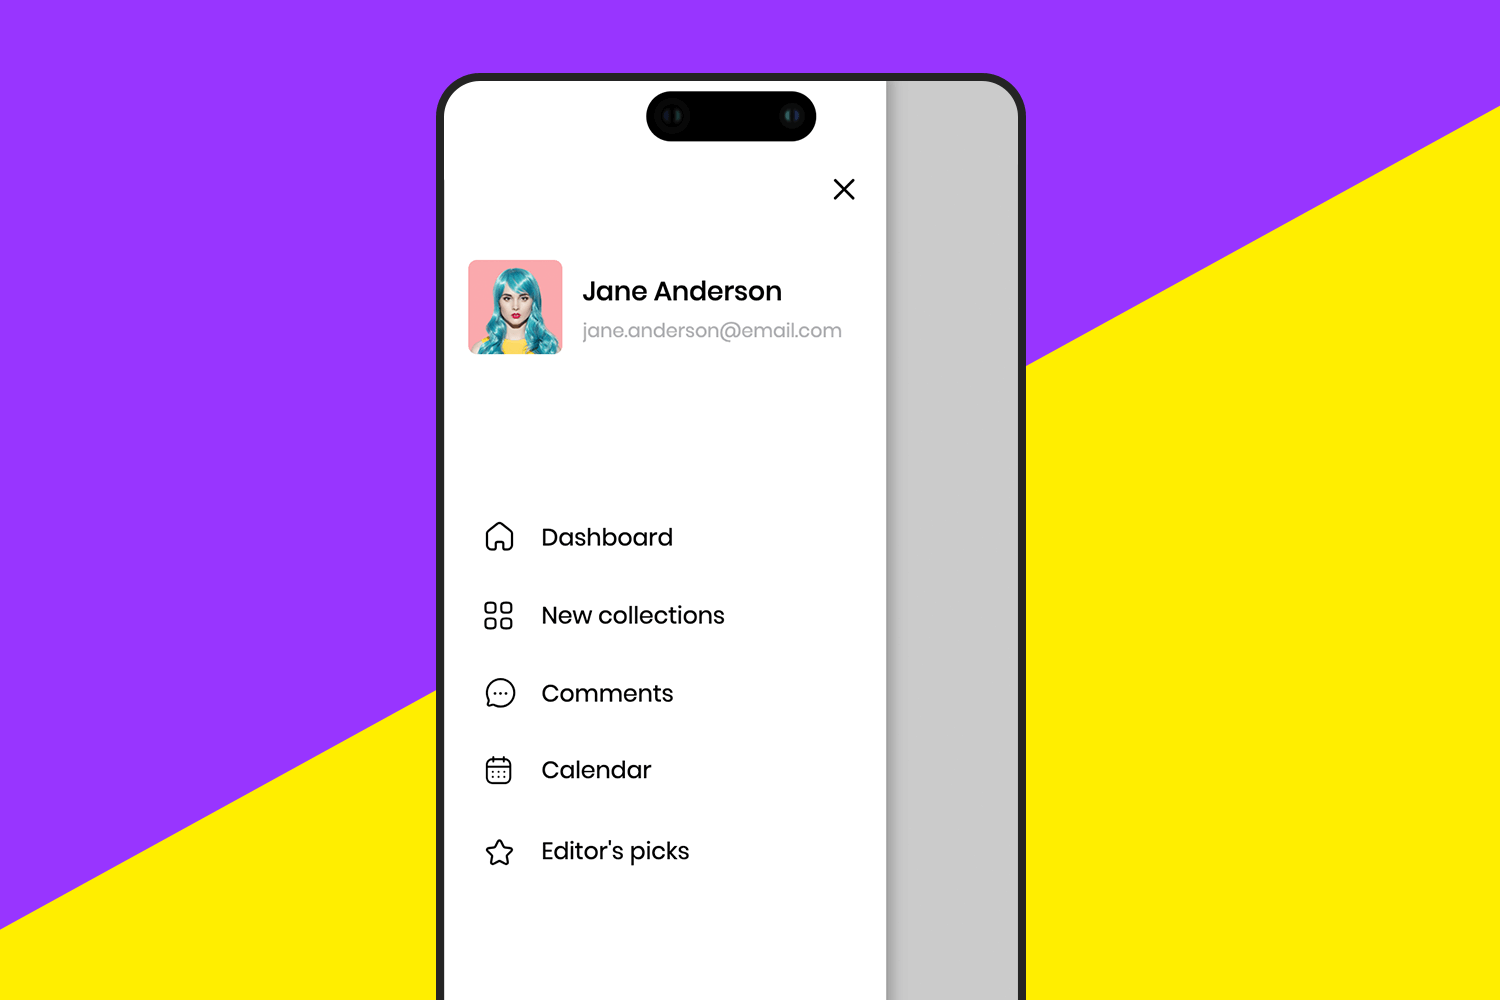 Slide menu template with user profile and navigation options